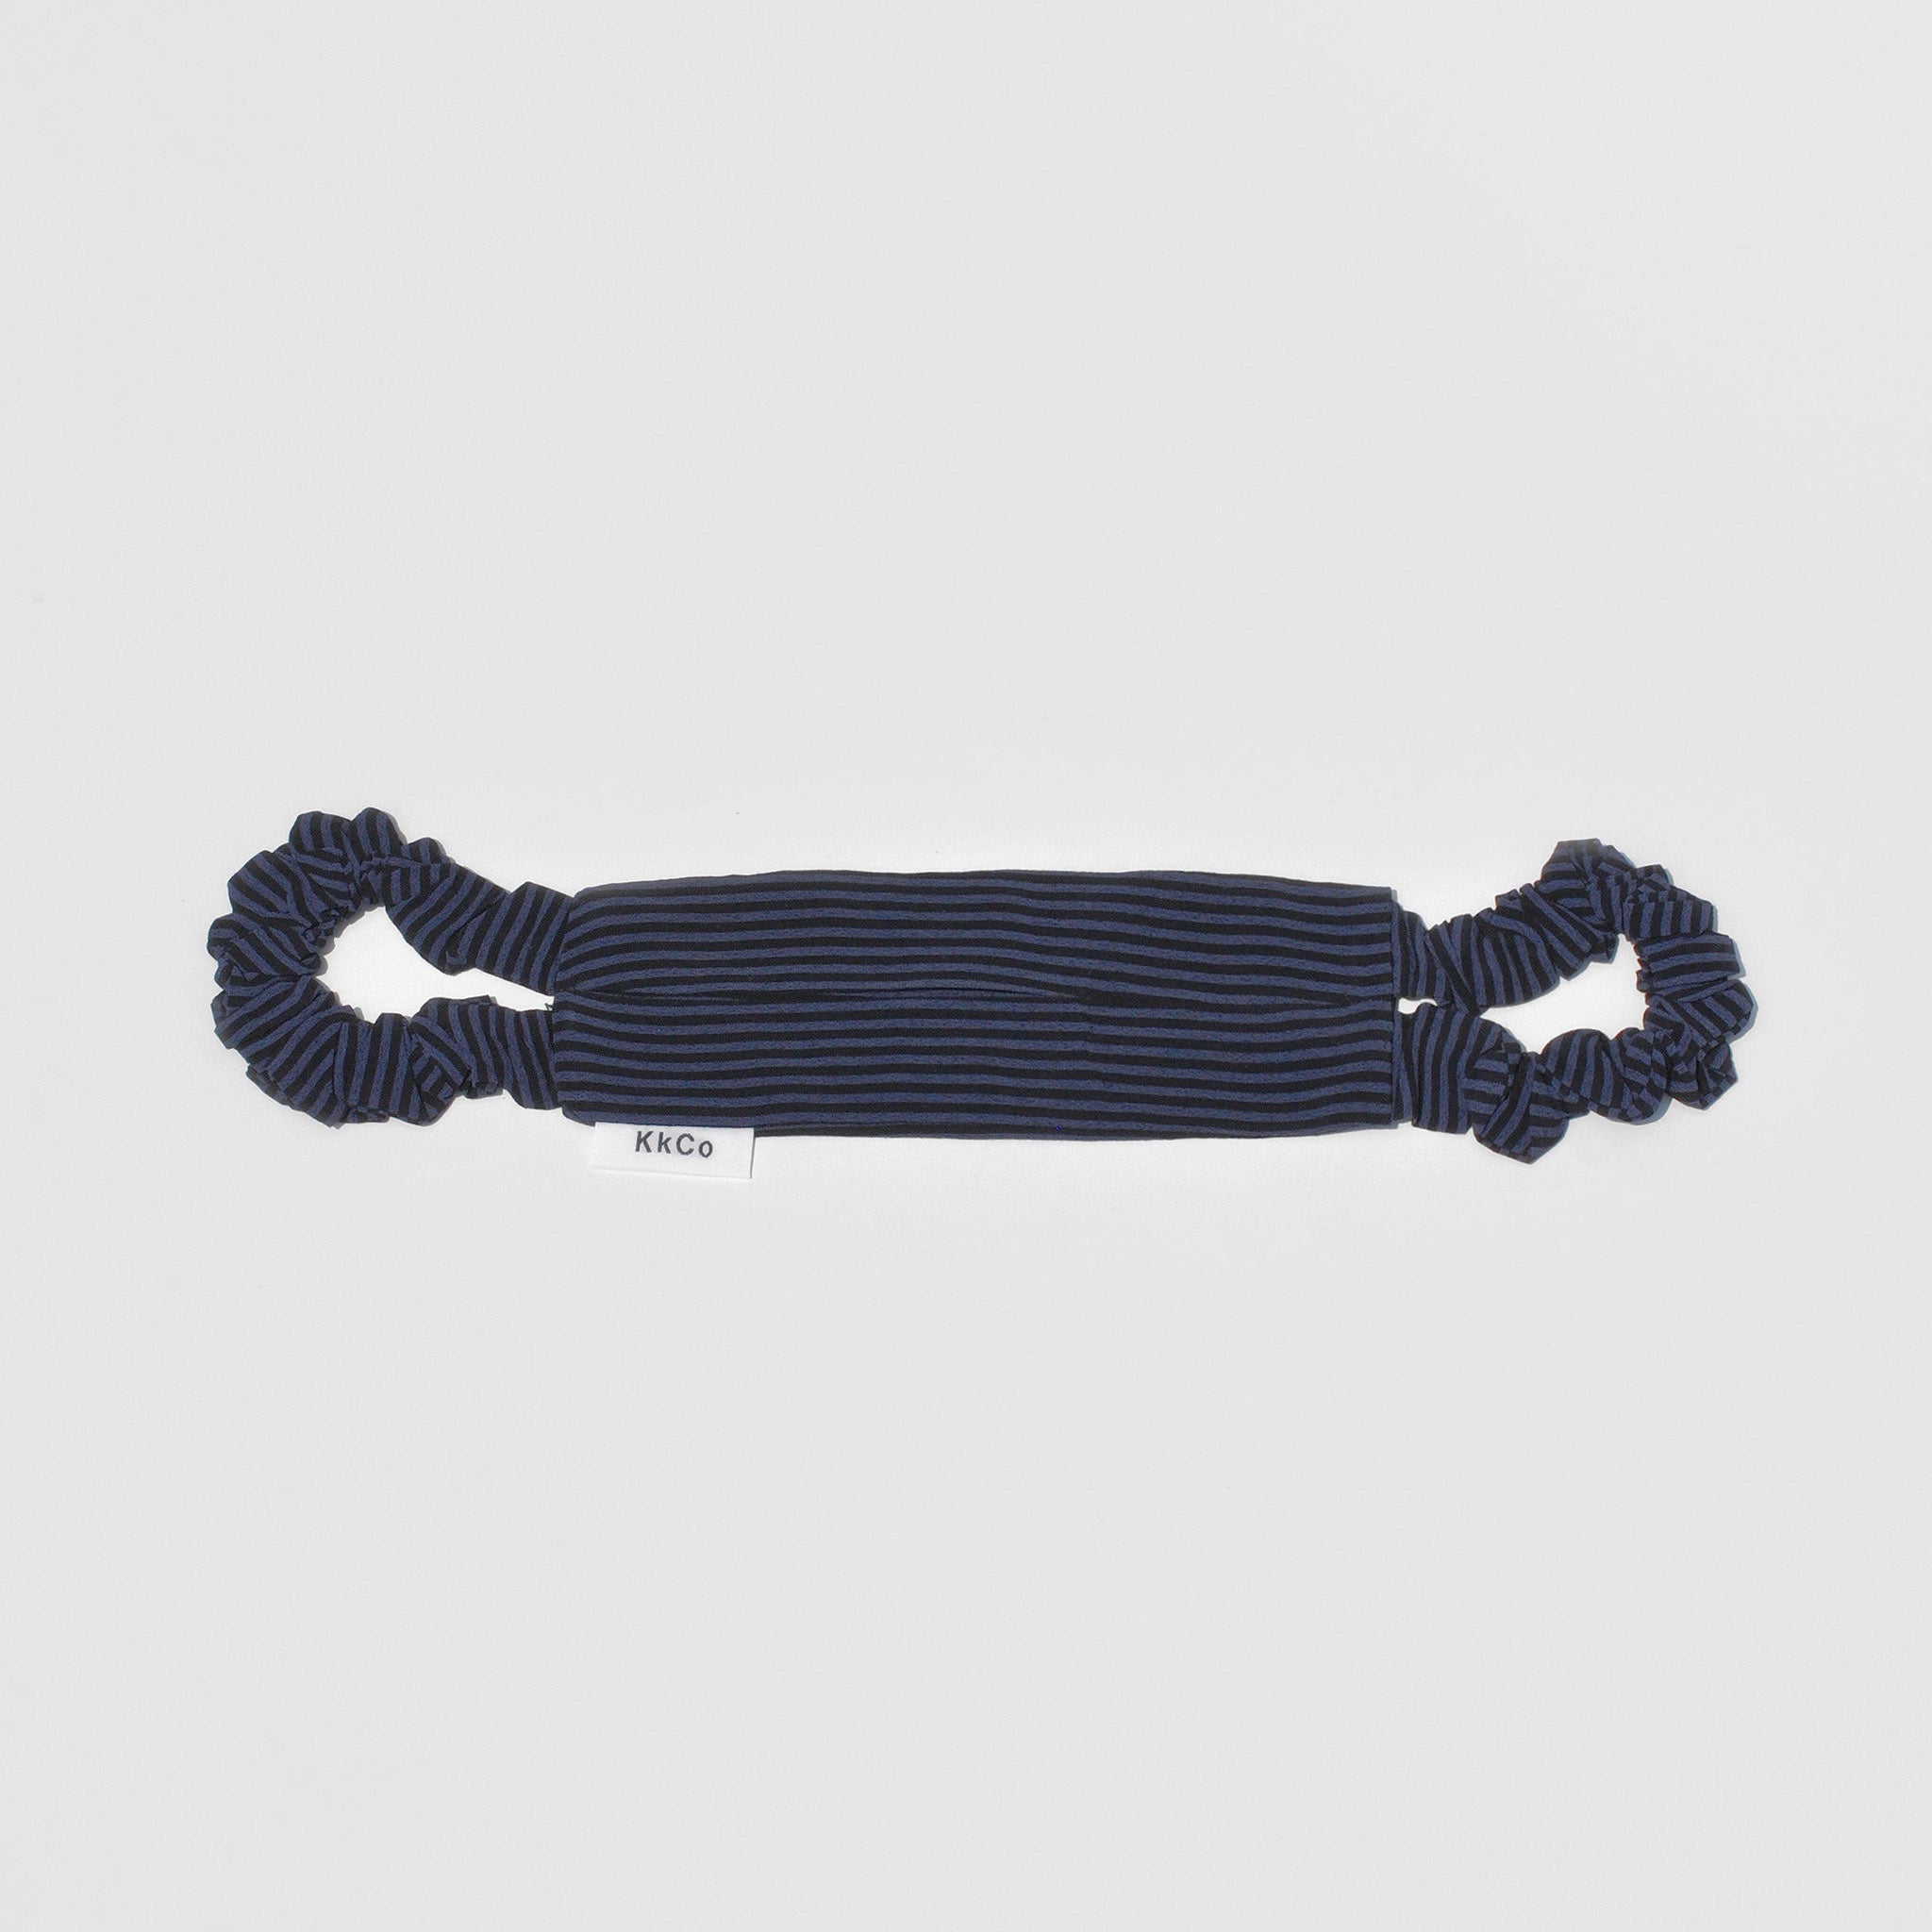 Flat image of a navy and black horizontally striped face covering featuring scrunchie style ear loops.